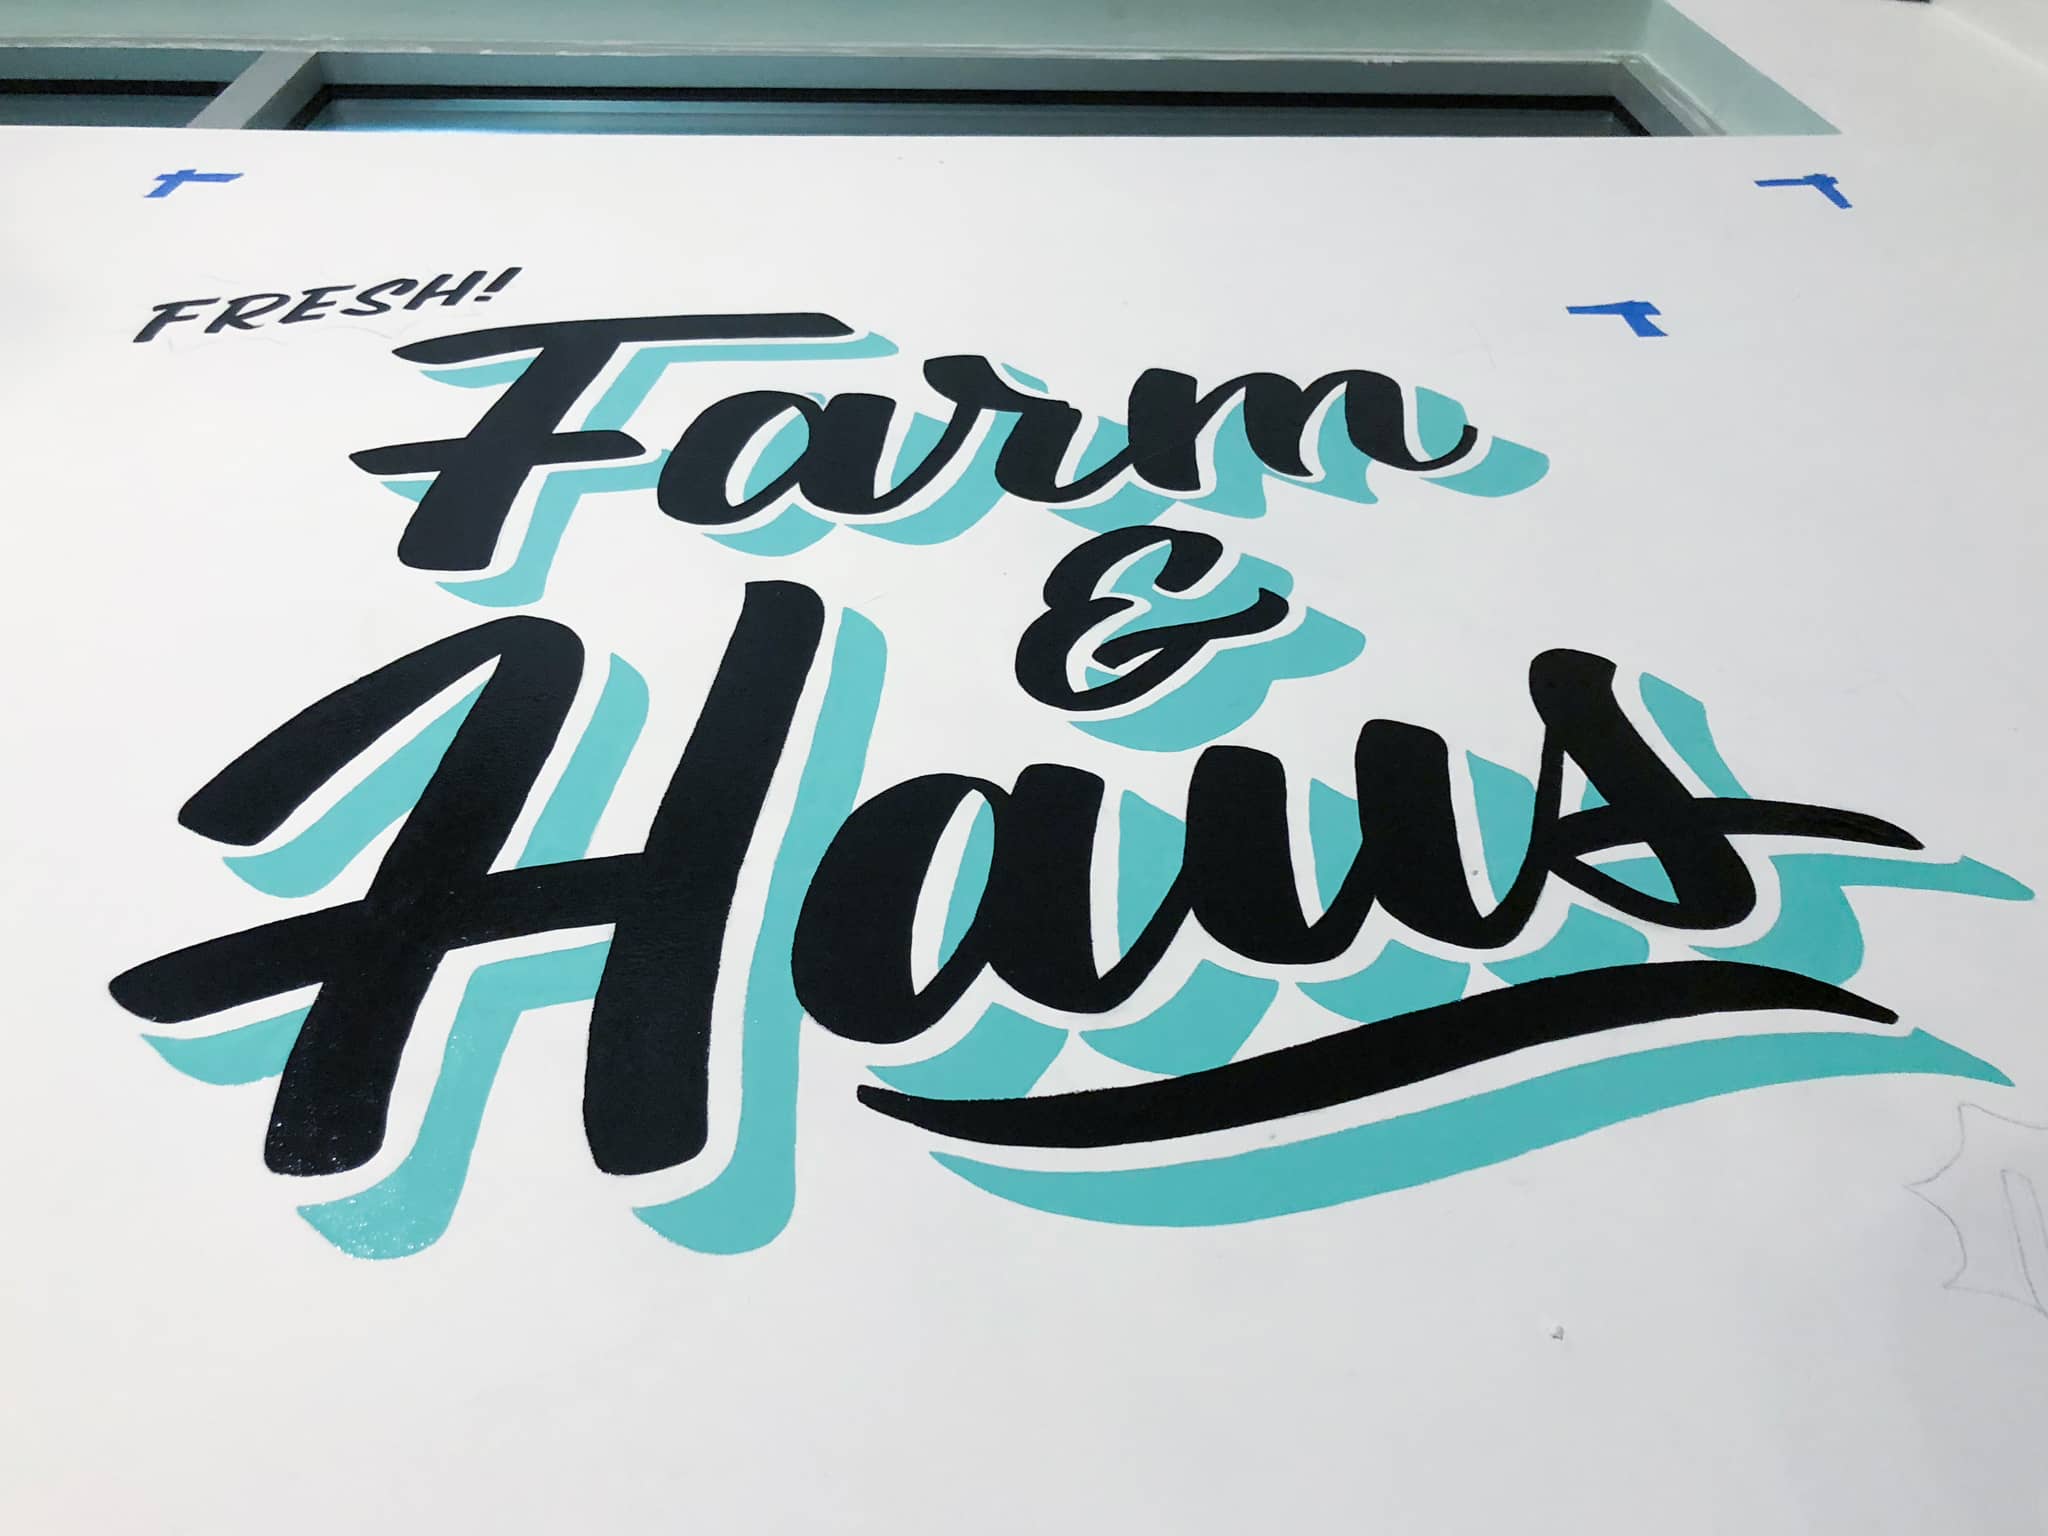 Farm & Haus hand lettered sign painted mural at East End Market by Hillery Powers